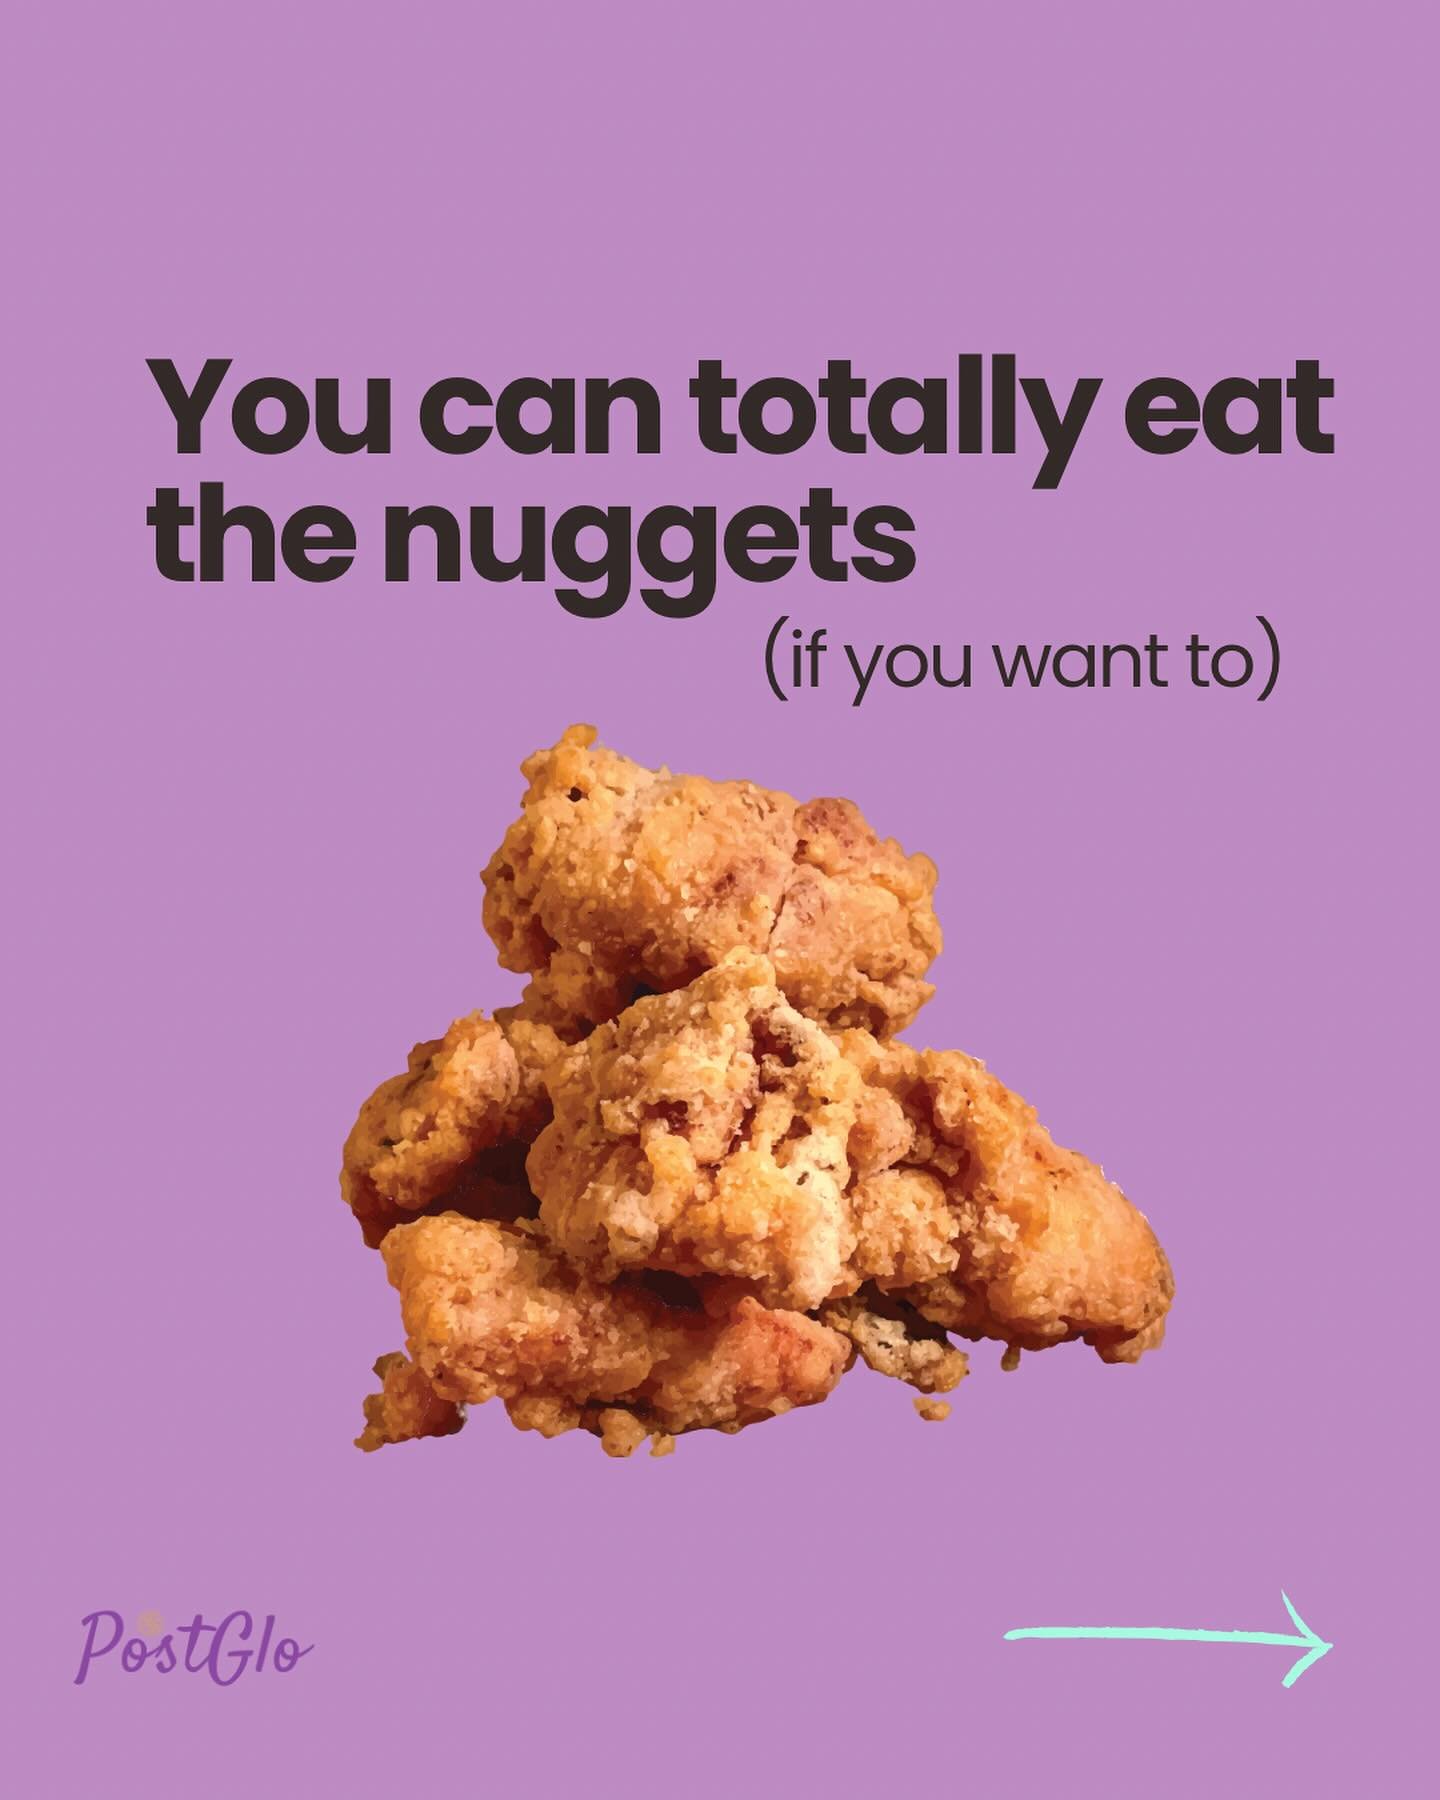 Chicken nuggets always get a bad rap. But you know what? These dietitians &amp; moms regularly add them our meal rotations.

Why? Because they are an awesome and convenient source of protein (and raising kids is a busy job so convenience is great!) T